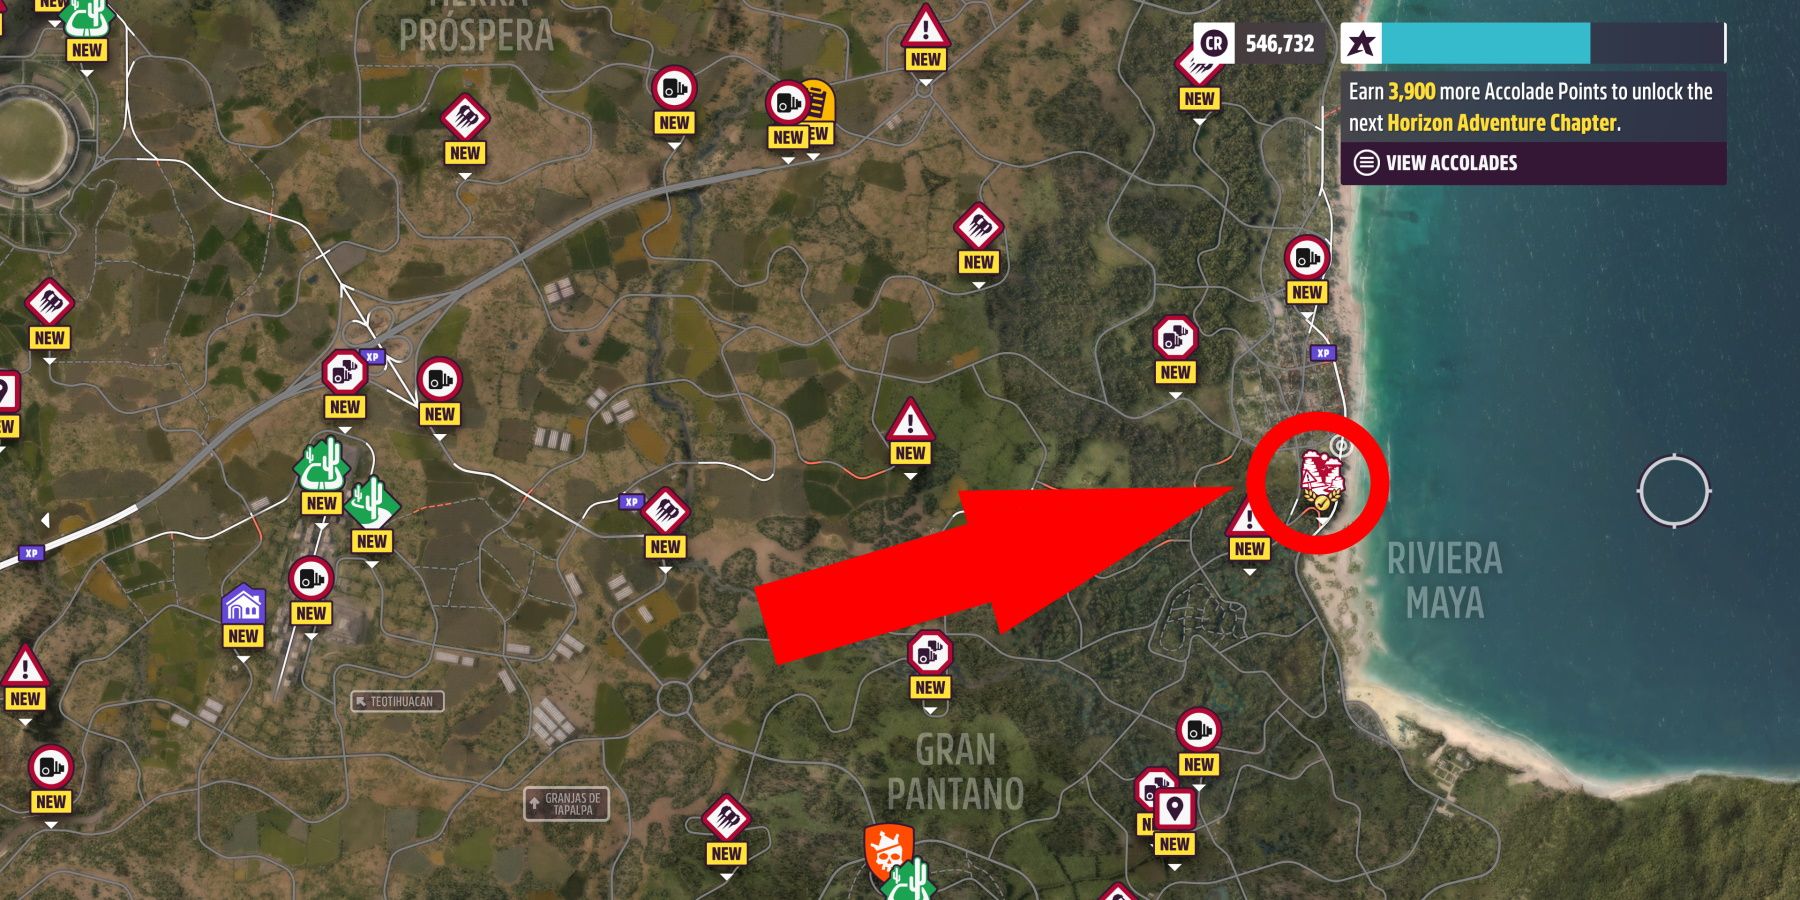 Forza Horizon 5 Canyon Expedition Location on map circled and arrow pointing at it